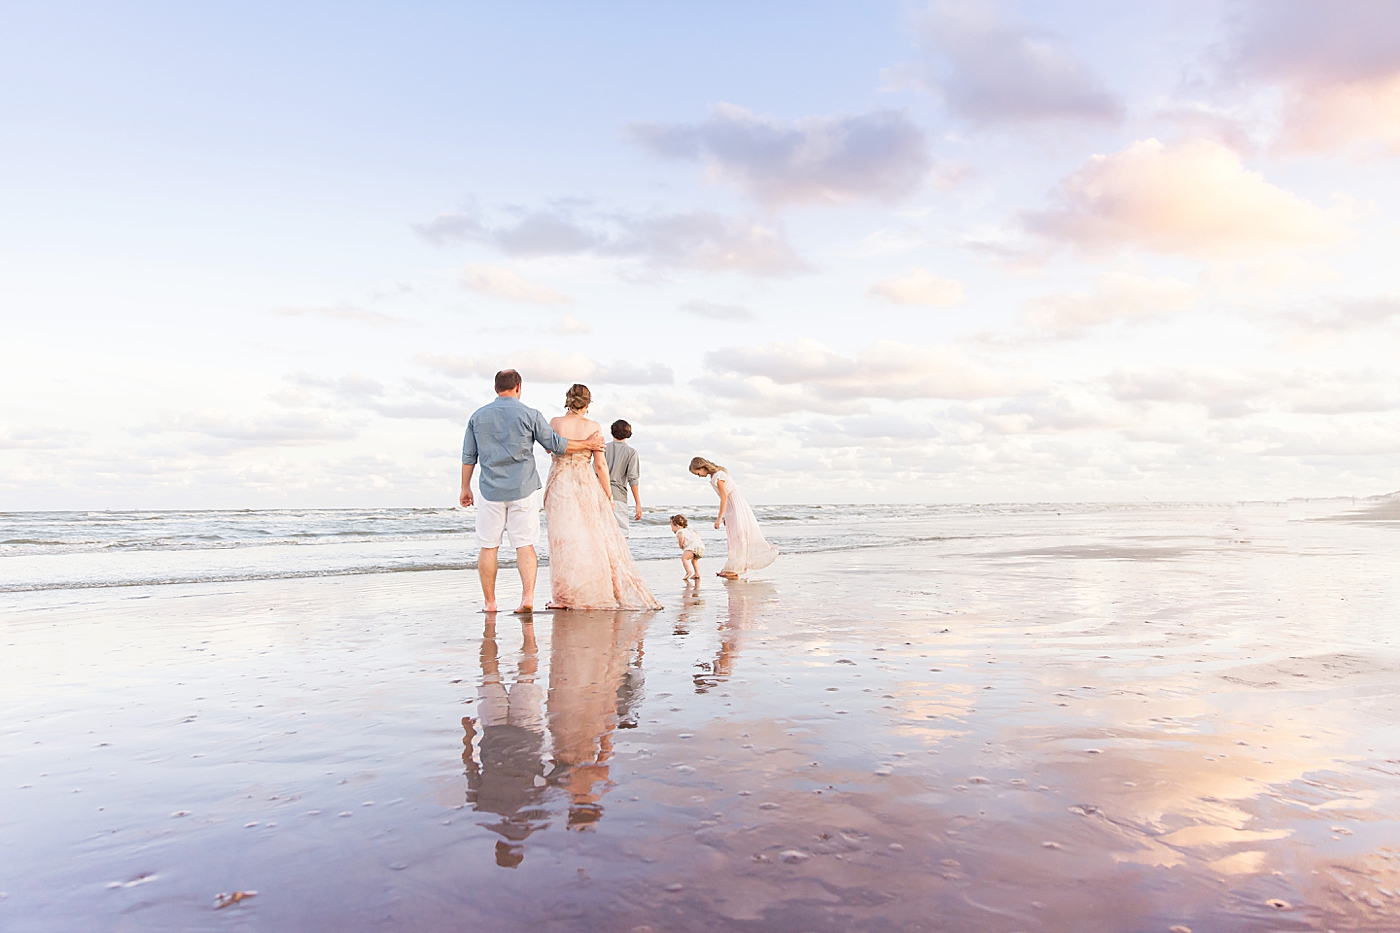 Family playing in the water at Galveston. Photo by Fresh Light Photography.